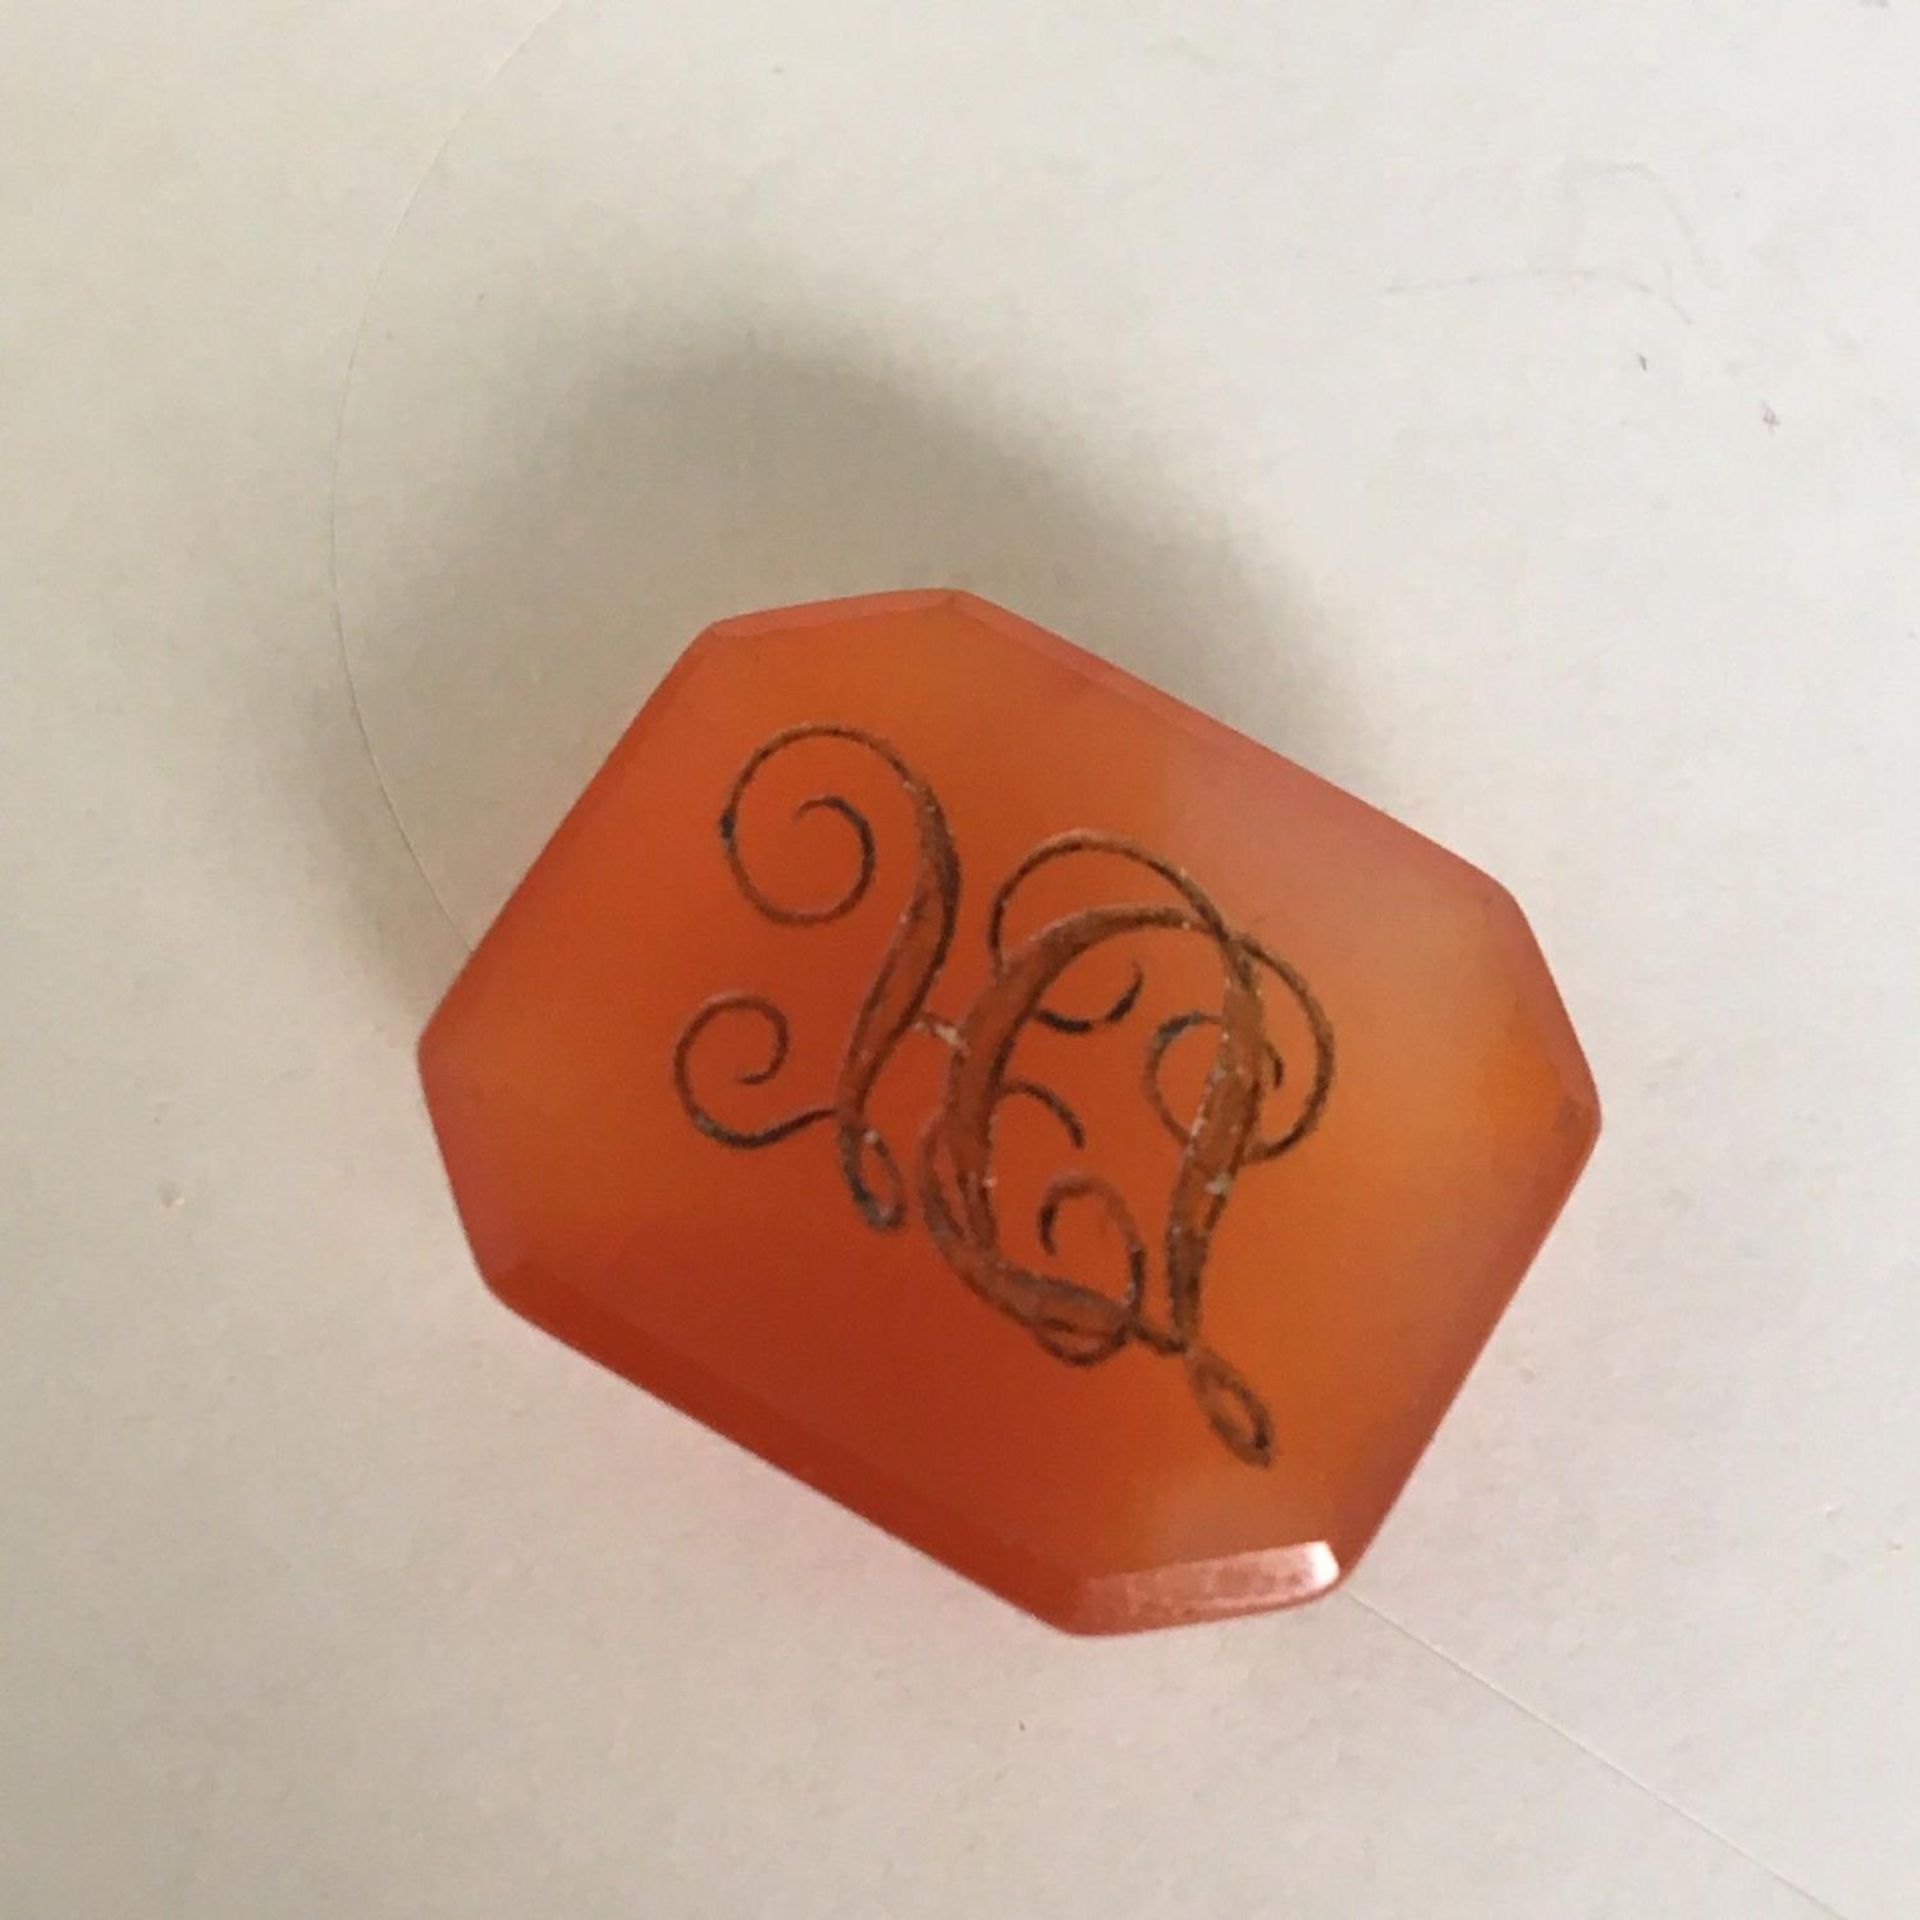 A Georgian or Victorian agate intaglio seal with the letters "LH".